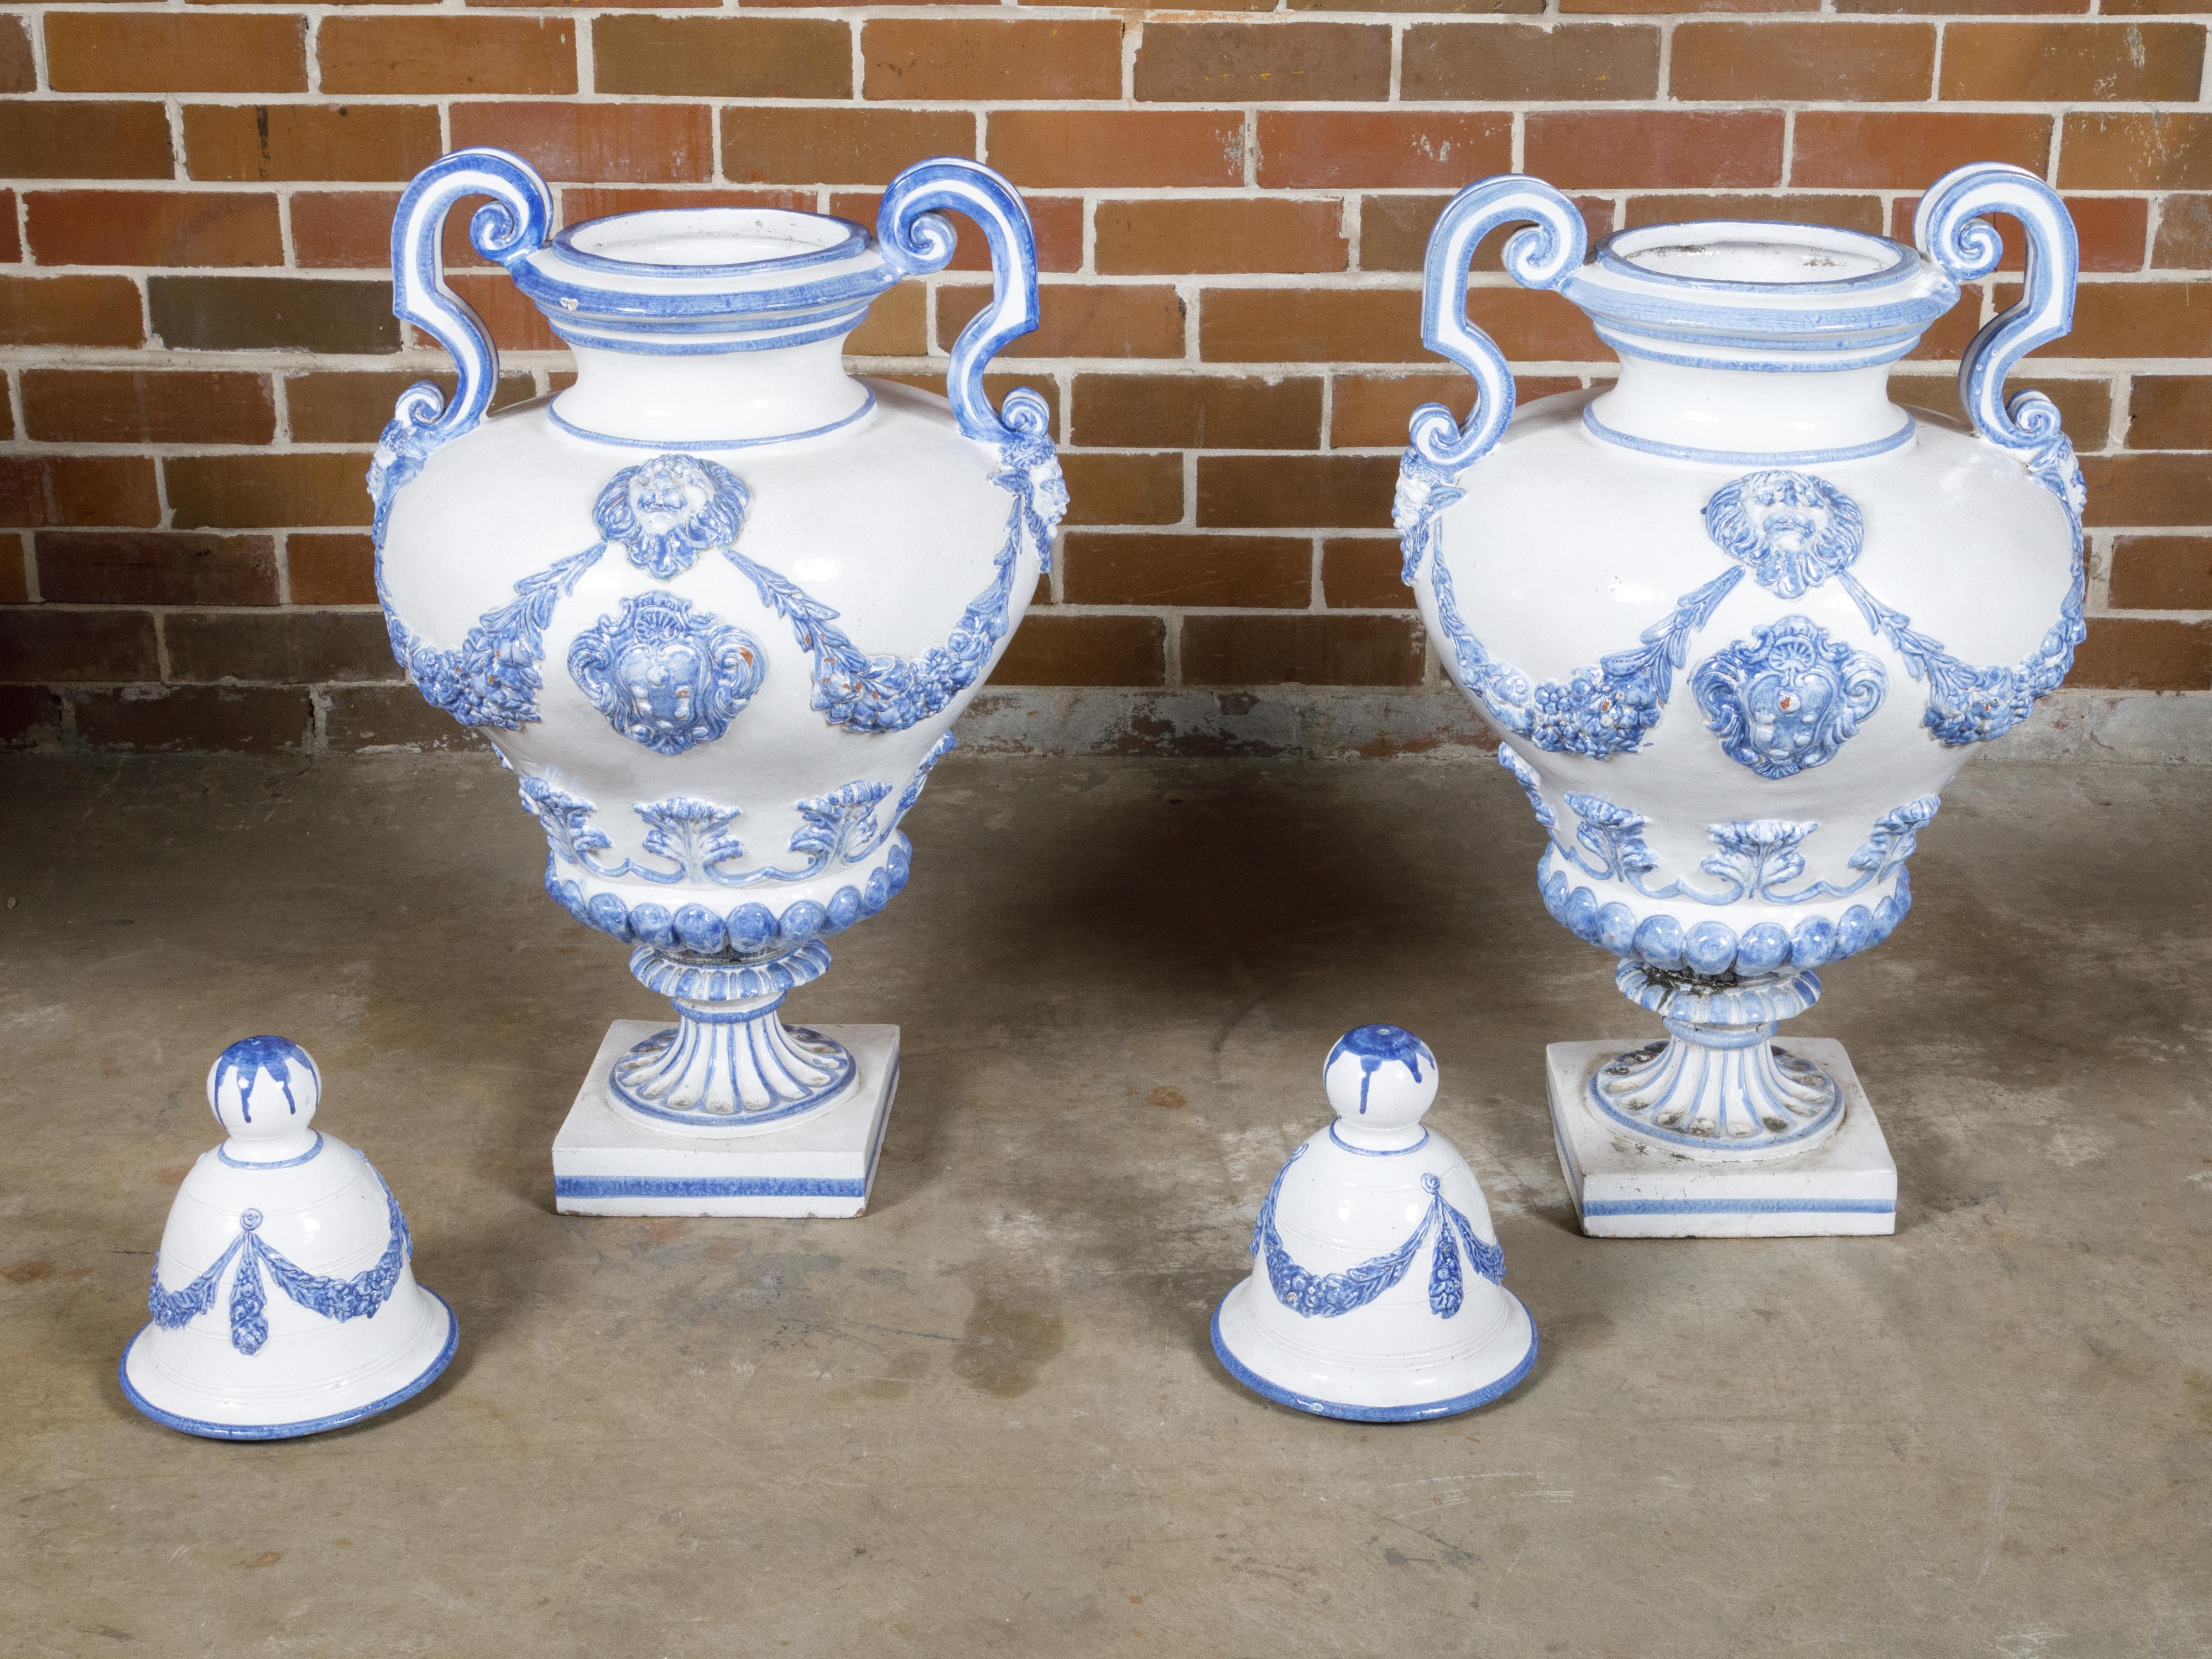 Italian Turn of the Century Blue and White Faience Lidded Jars with Fauns, Pair For Sale 6